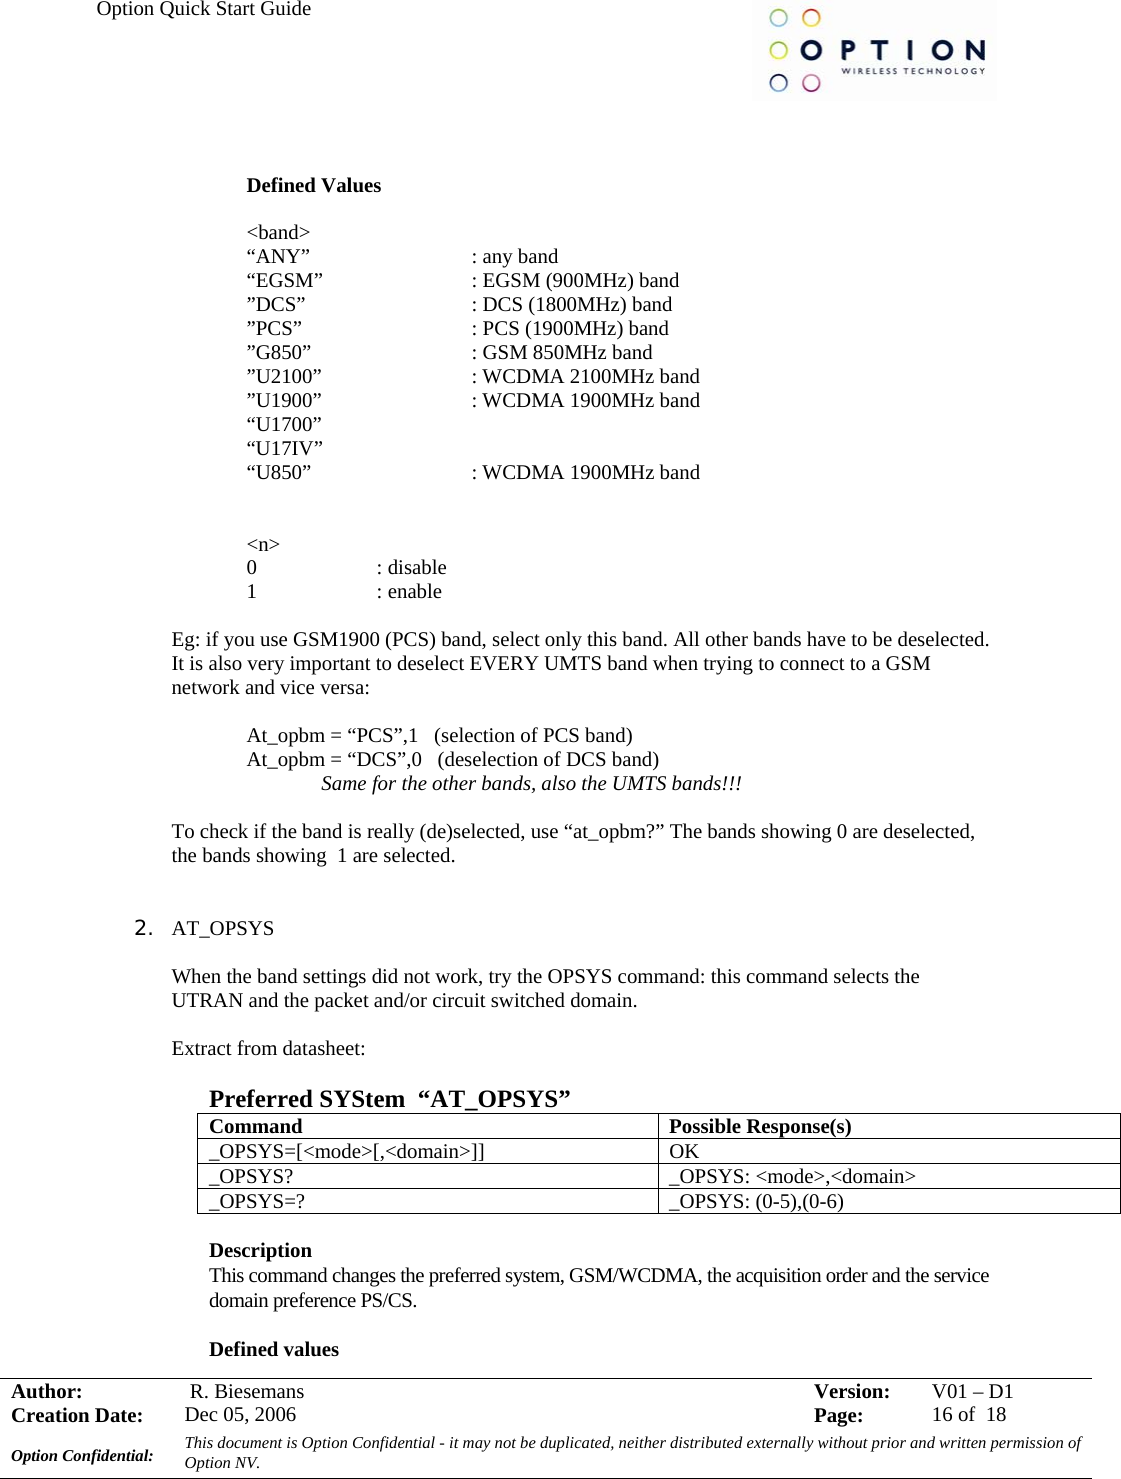 Option Quick Start Guide     Author:   R. Biesemans  Version:  V01 –D1Creation Date:  Dec 05, 2006    Page:  16 of  18 Option Confidential:  This document is Option Confidential - it may not be duplicated, neither distributed externally without prior and written permission of Option NV.     Defined Values  &lt;band&gt; “ANY”                  : any band “EGSM”                : EGSM (900MHz) band ”DCS”                   : DCS (1800MHz) band ”PCS”                   : PCS (1900MHz) band ”G850”                  : GSM 850MHz band ”U2100”                : WCDMA 2100MHz band ”U1900”            : WCDMA 1900MHz band “U1700” “U17IV”  “U850”      : WCDMA 1900MHz band   &lt;n&gt; 0                       : disable 1                       : enable  Eg: if you use GSM1900 (PCS) band, select only this band. All other bands have to be deselected. It is also very important to deselect EVERY UMTS band when trying to connect to a GSM network and vice versa:    At_opbm = “PCS”,1   (selection of PCS band)   At_opbm = “DCS”,0   (deselection of DCS band)   Same for the other bands, also the UMTS bands!!!  To check if the band is really (de)selected, use “at_opbm?” The bands showing 0 are deselected, the bands showing  1 are selected.   2. AT_OPSYS  When the band settings did not work, try the OPSYS command: this command selects the UTRAN and the packet and/or circuit switched domain.  Extract from datasheet:  Preferred SYStem  “AT_OPSYS” Command Possible Response(s) _OPSYS=[&lt;mode&gt;[,&lt;domain&gt;]] OK _OPSYS? _OPSYS: &lt;mode&gt;,&lt;domain&gt; _OPSYS=? _OPSYS: (0-5),(0-6)  Description  This command changes the preferred system, GSM/WCDMA, the acquisition order and the service domain preference PS/CS. Defined values 